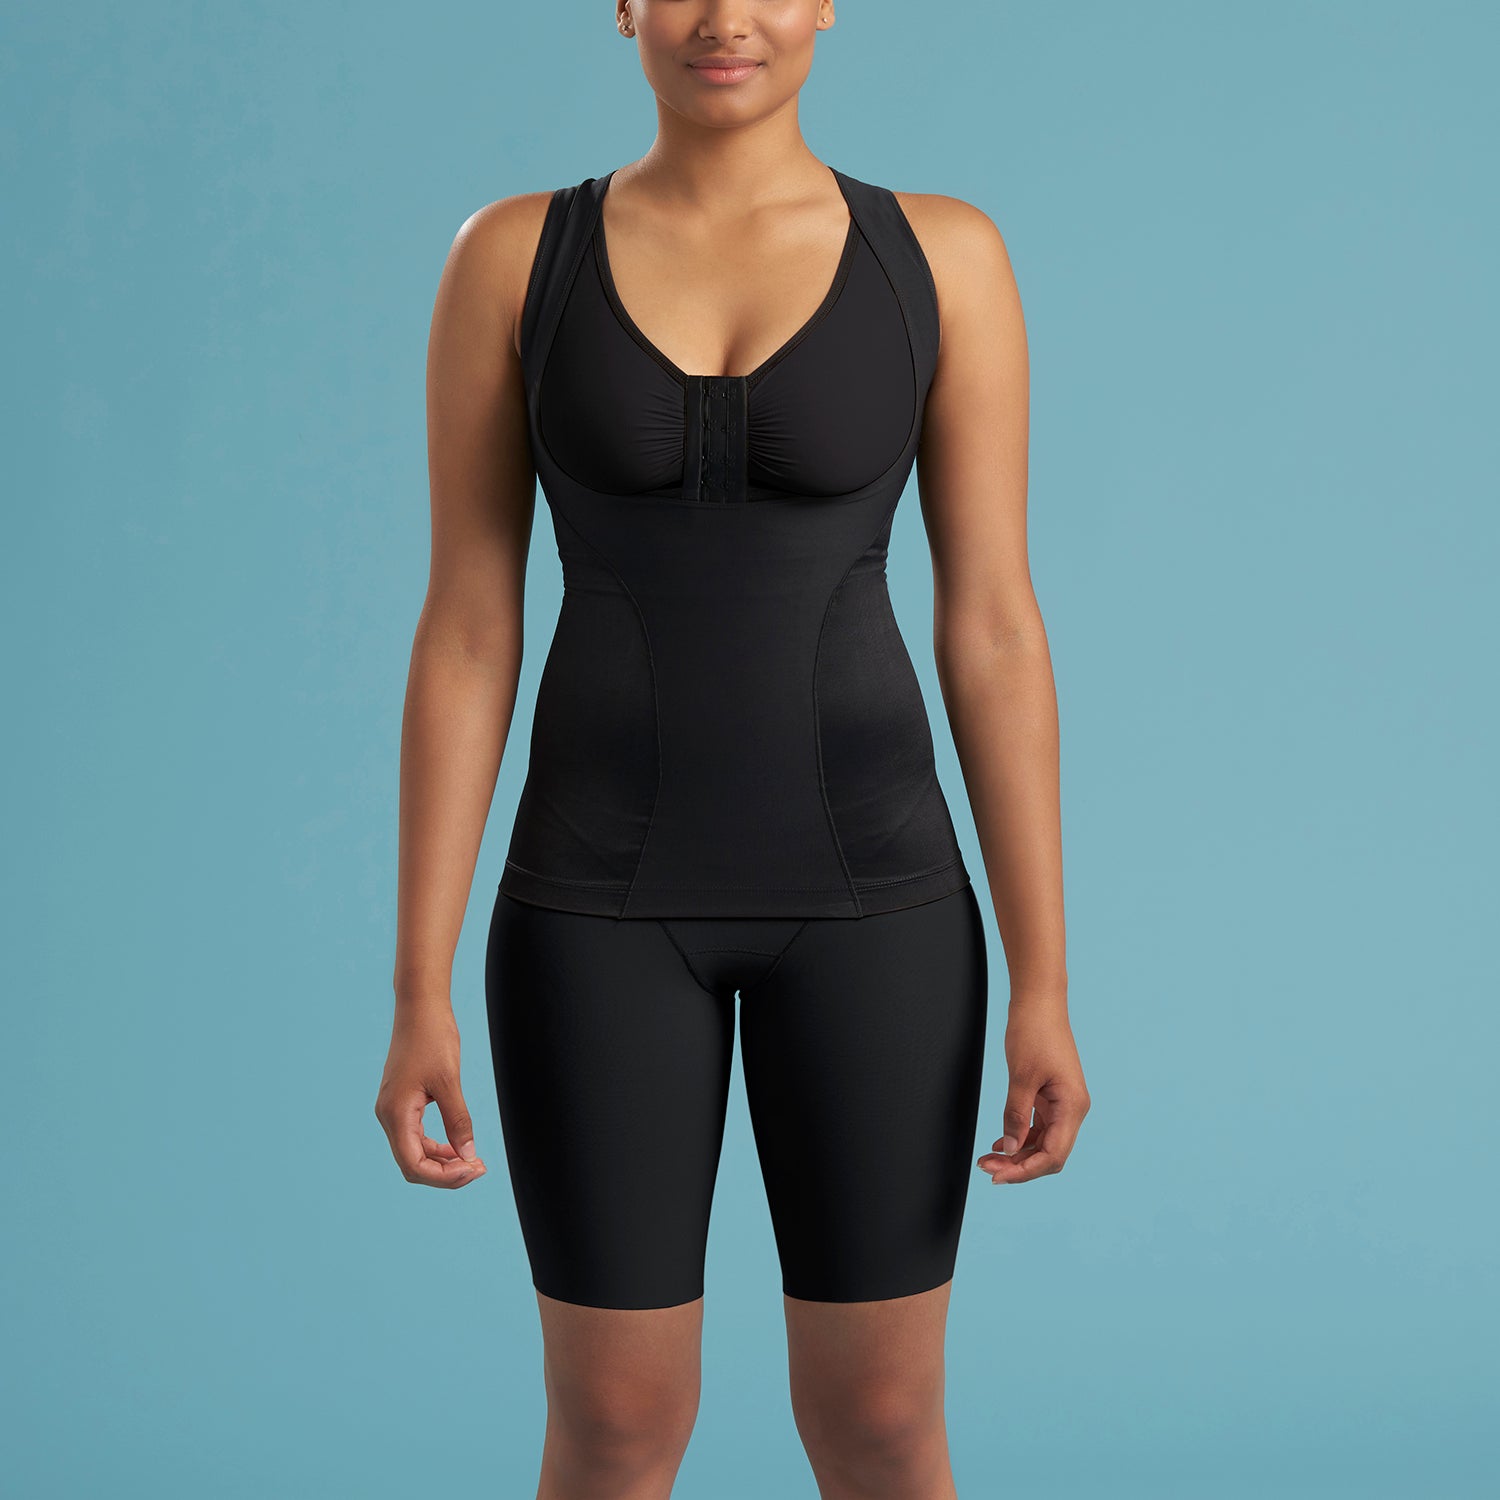 Best Shapewear for Women  Compression Garments for Women - The Marena  Group, LLC